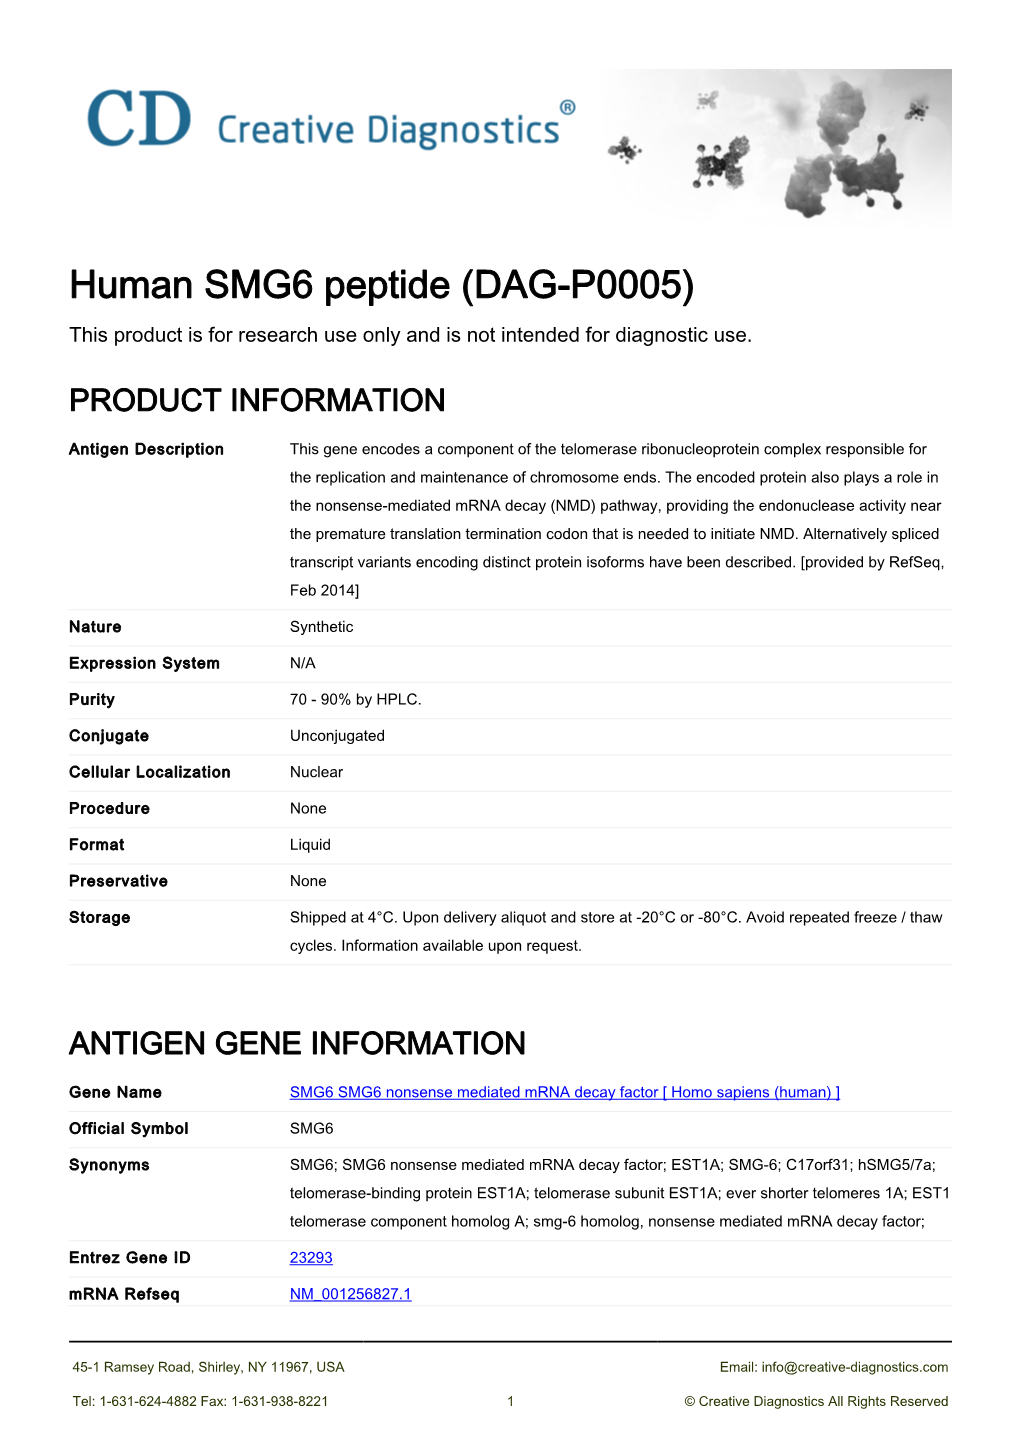 Human SMG6 Peptide (DAG-P0005) This Product Is for Research Use Only and Is Not Intended for Diagnostic Use